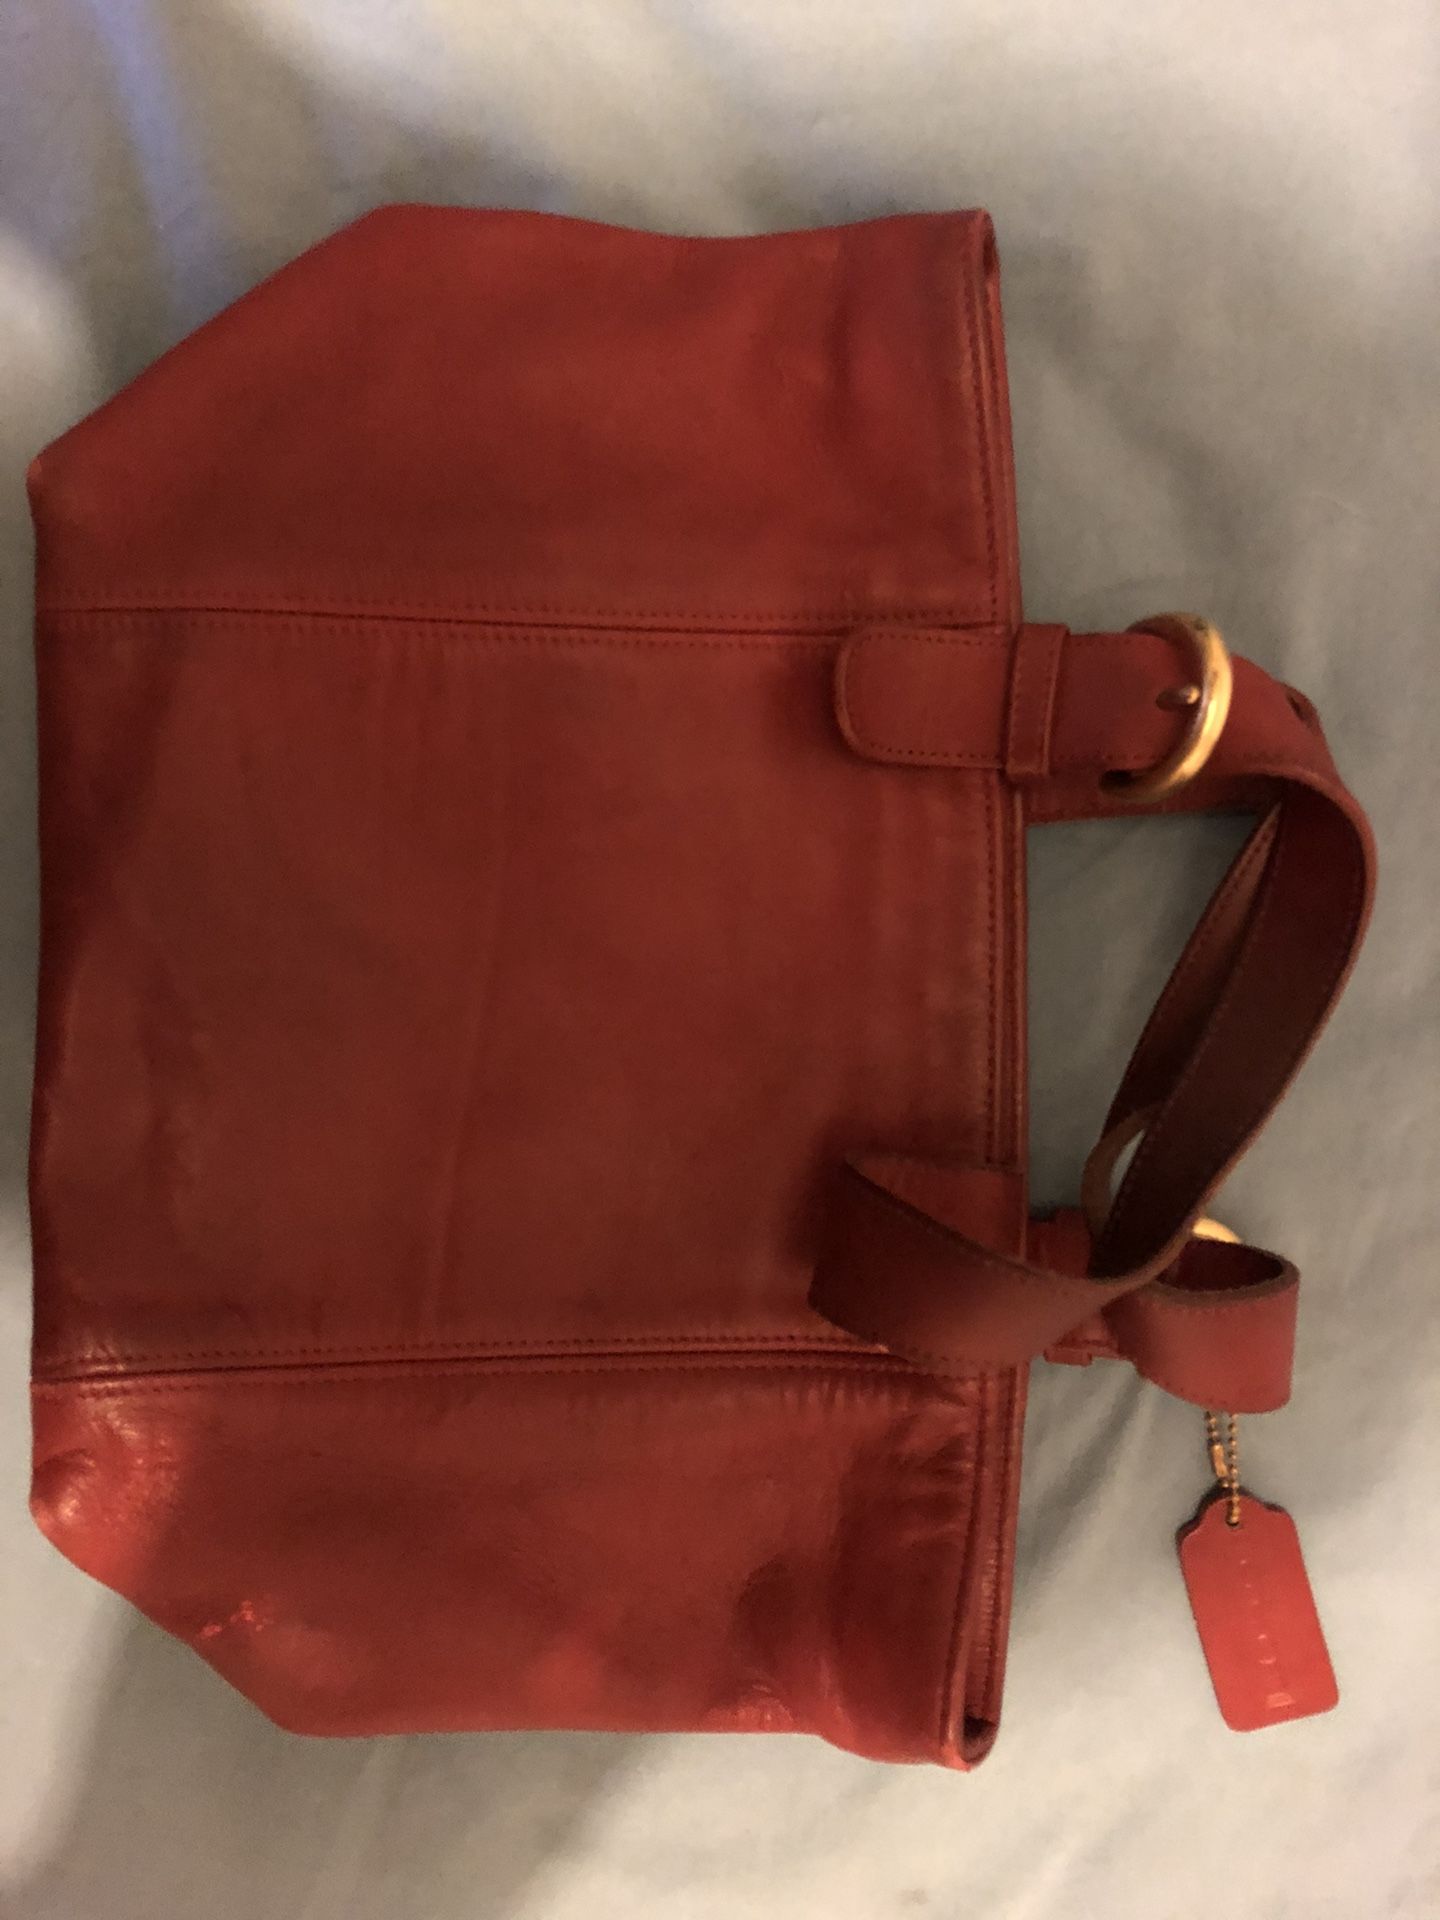 Rarely Used Red Leather Coach Purse